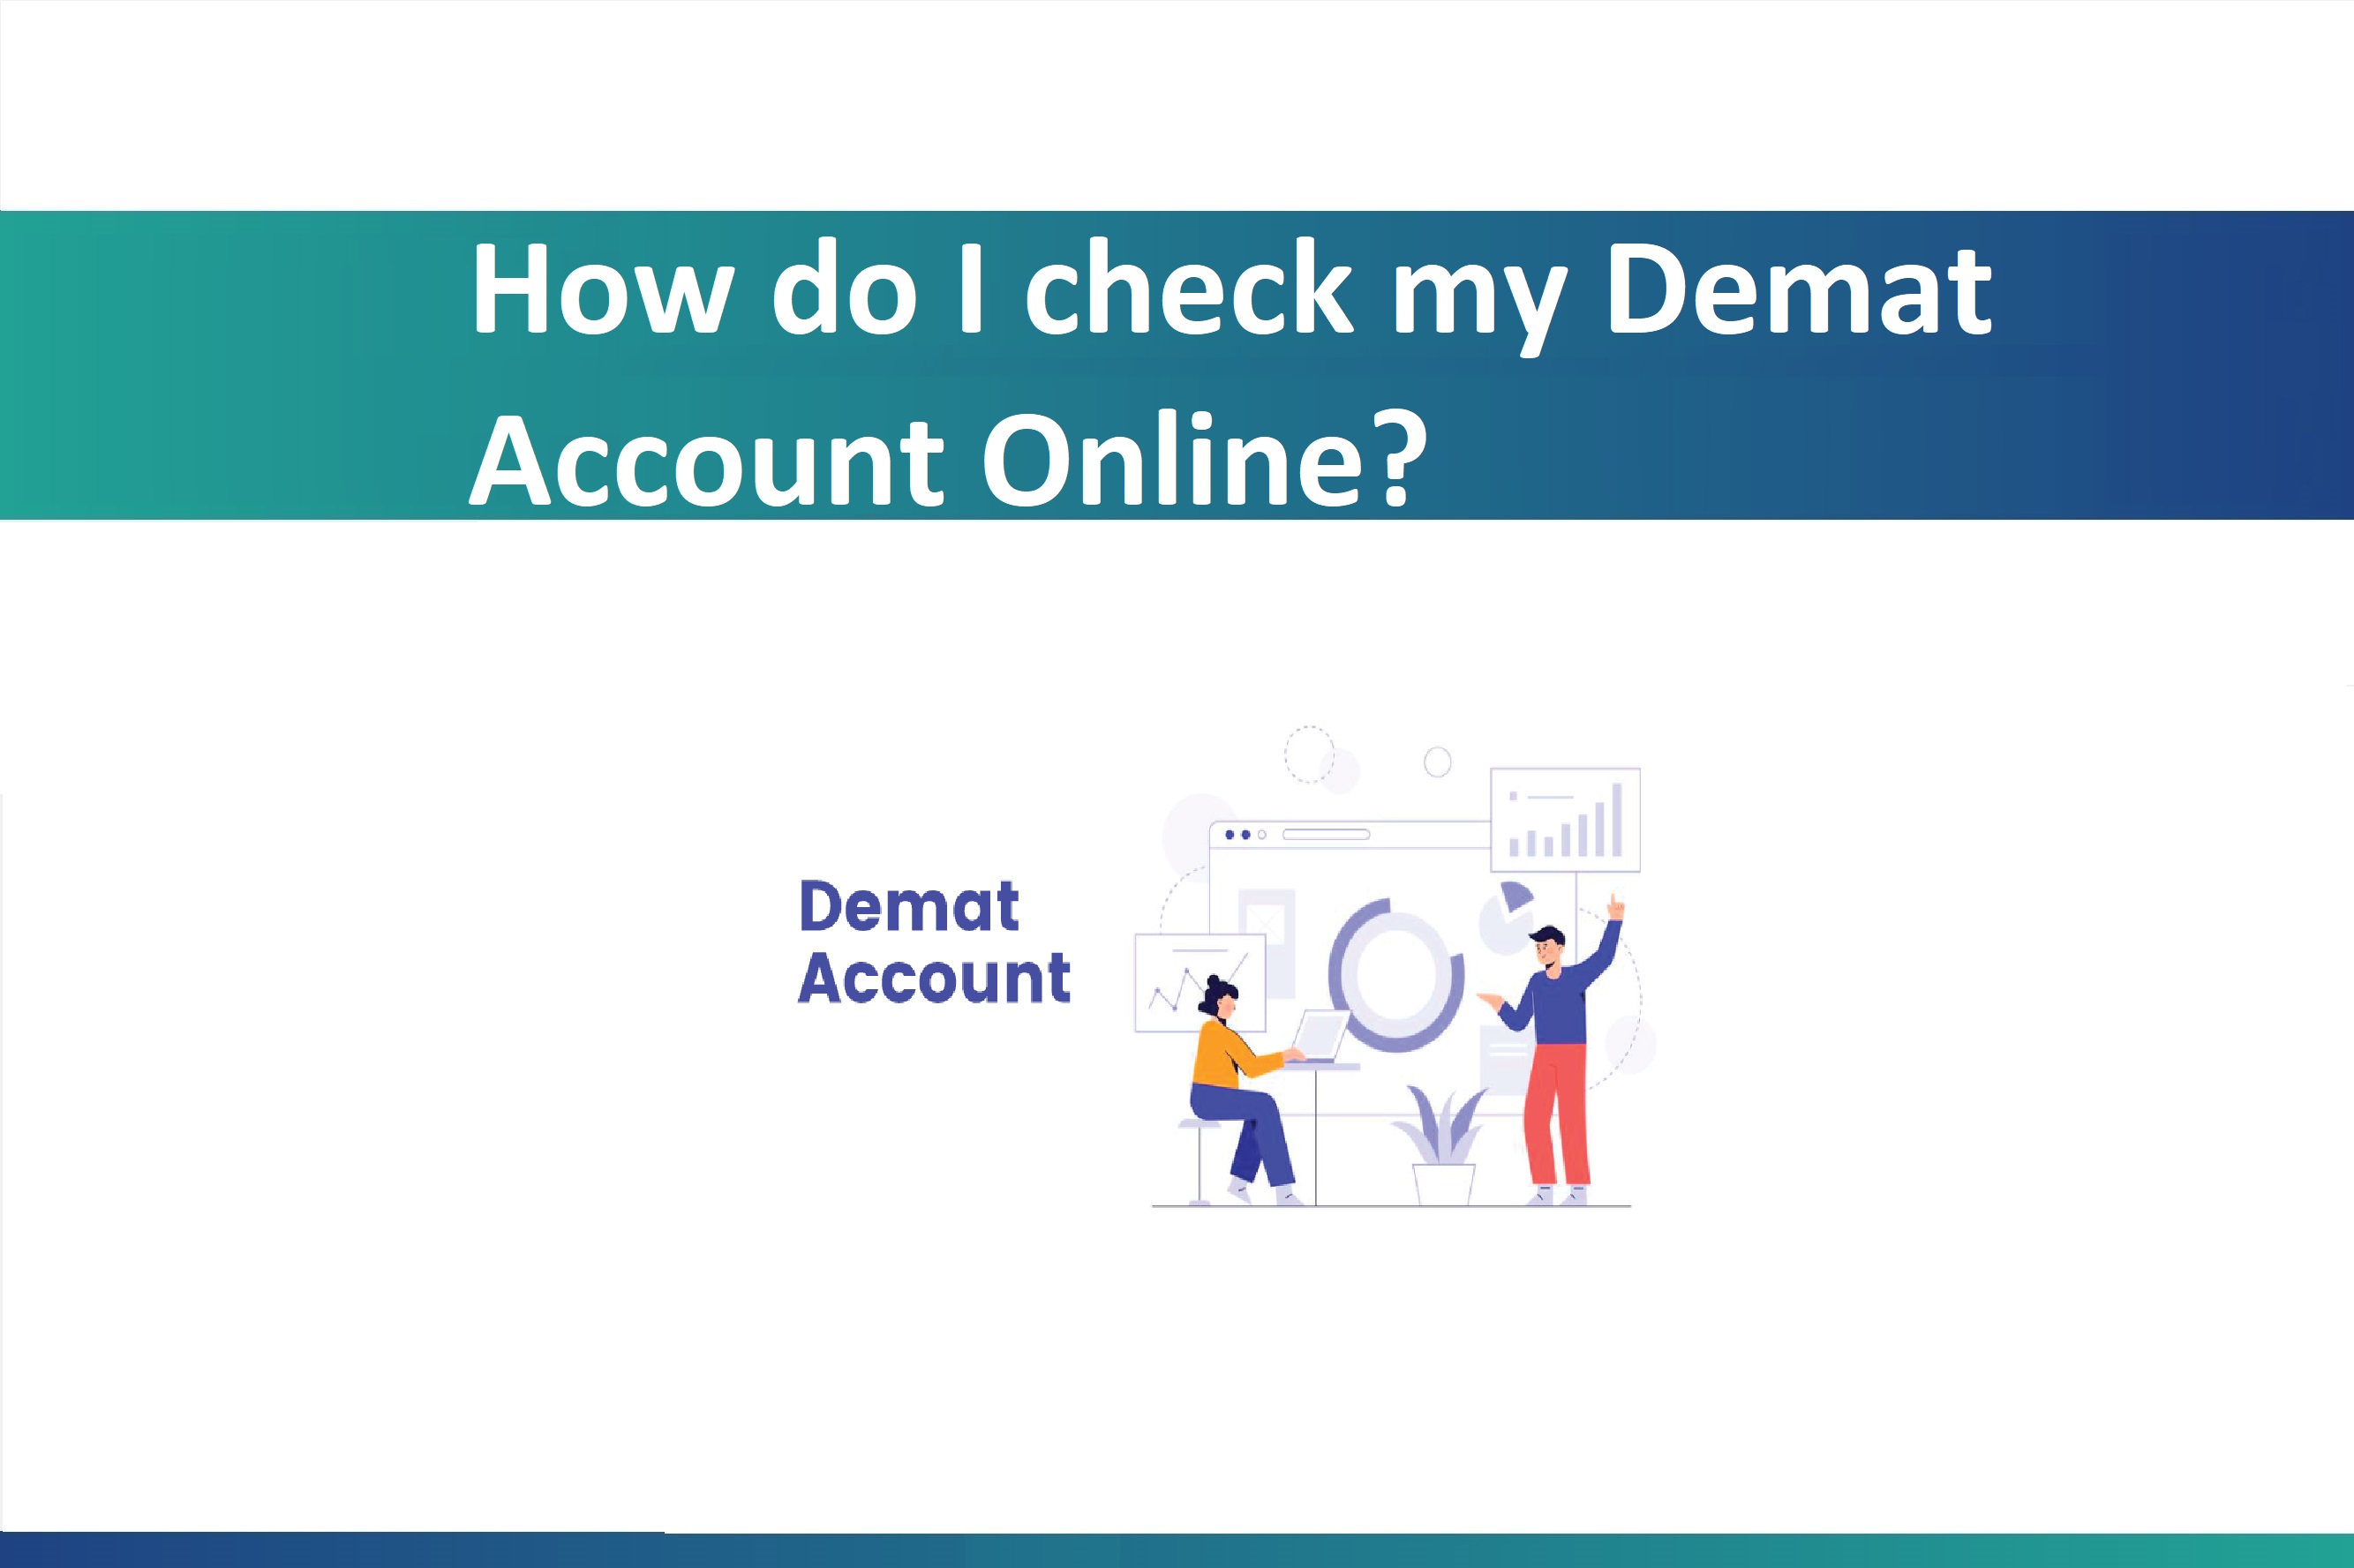 How do I check my Demat account online?